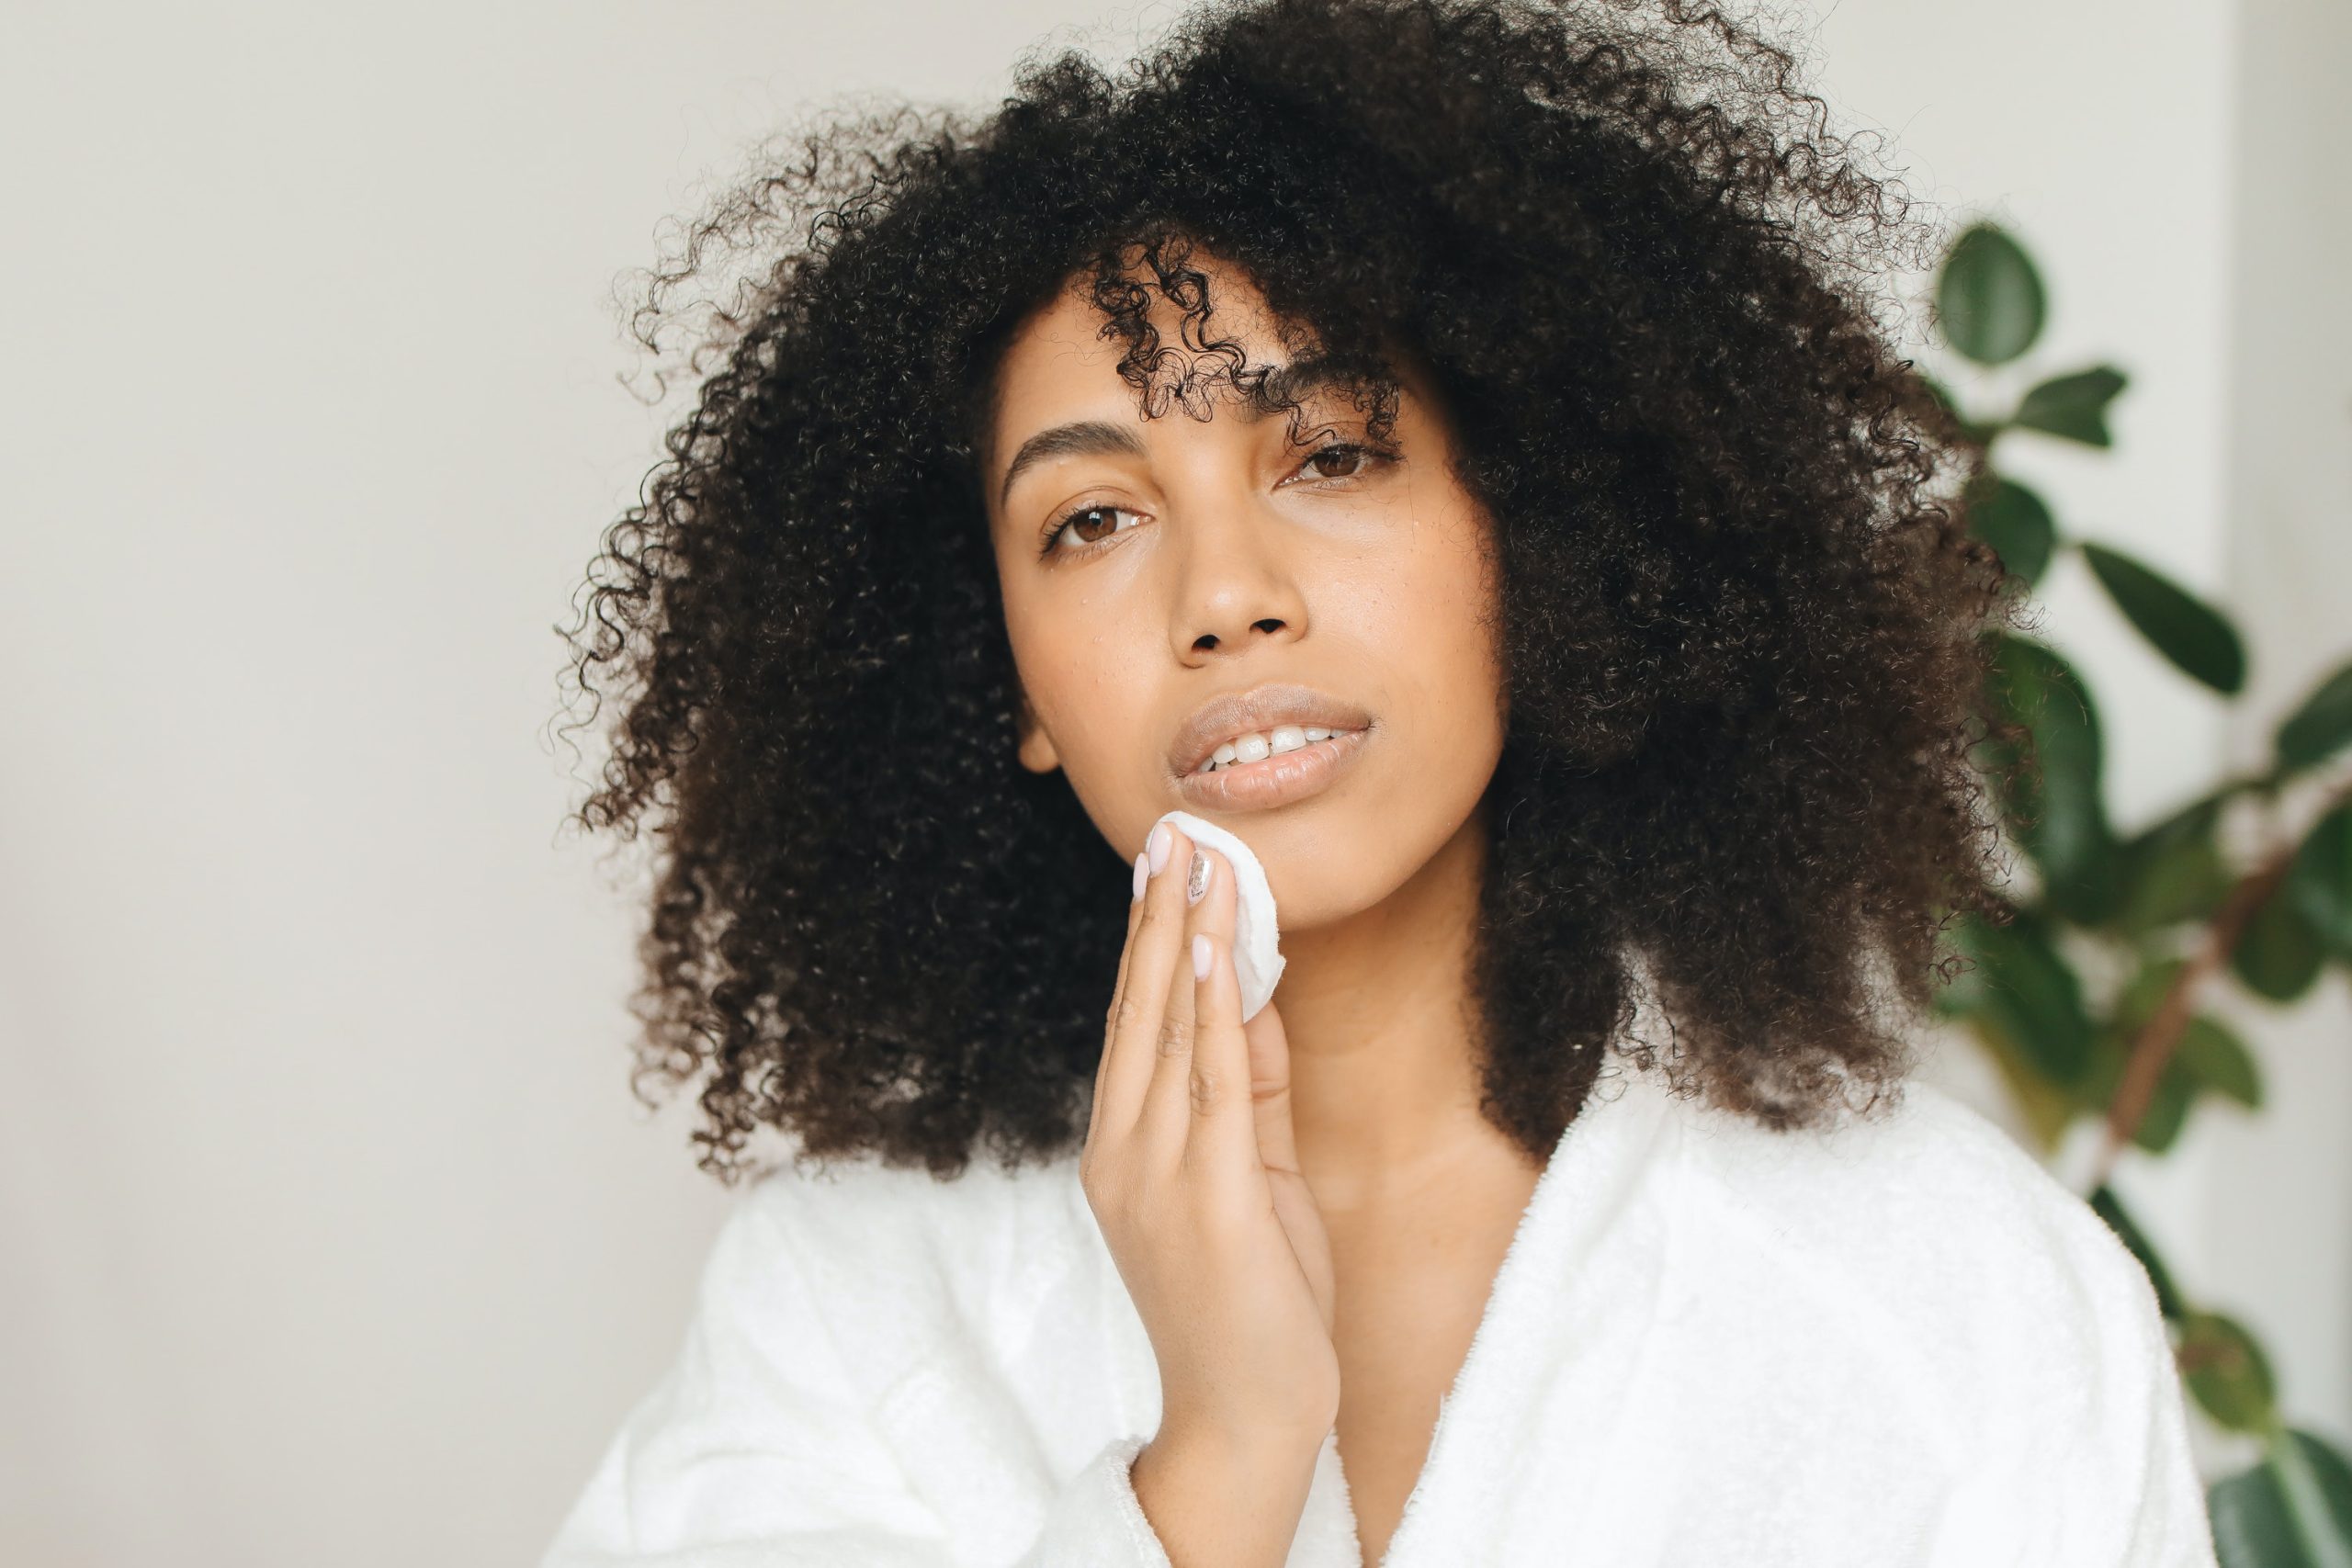 Skincare habits for dry, dehydrated skin 